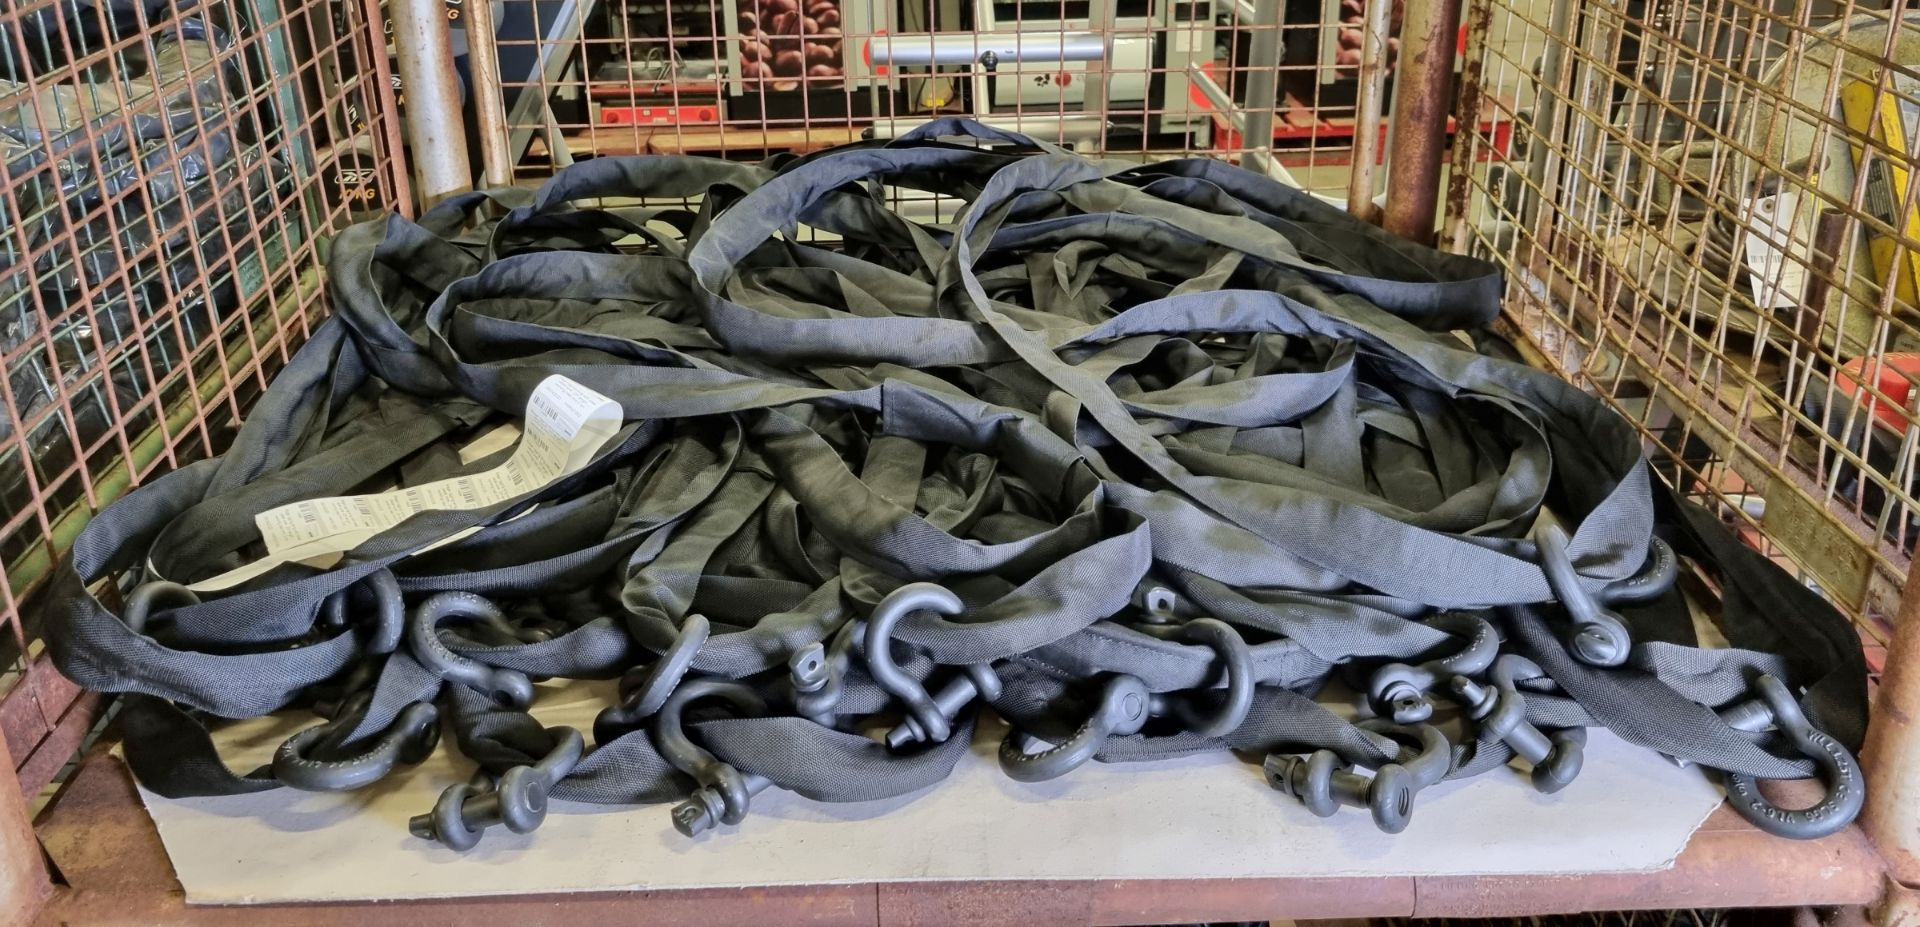 18x Stage rigging slings with steel cable core - 2m length - working load limit 2 ton - Image 2 of 3